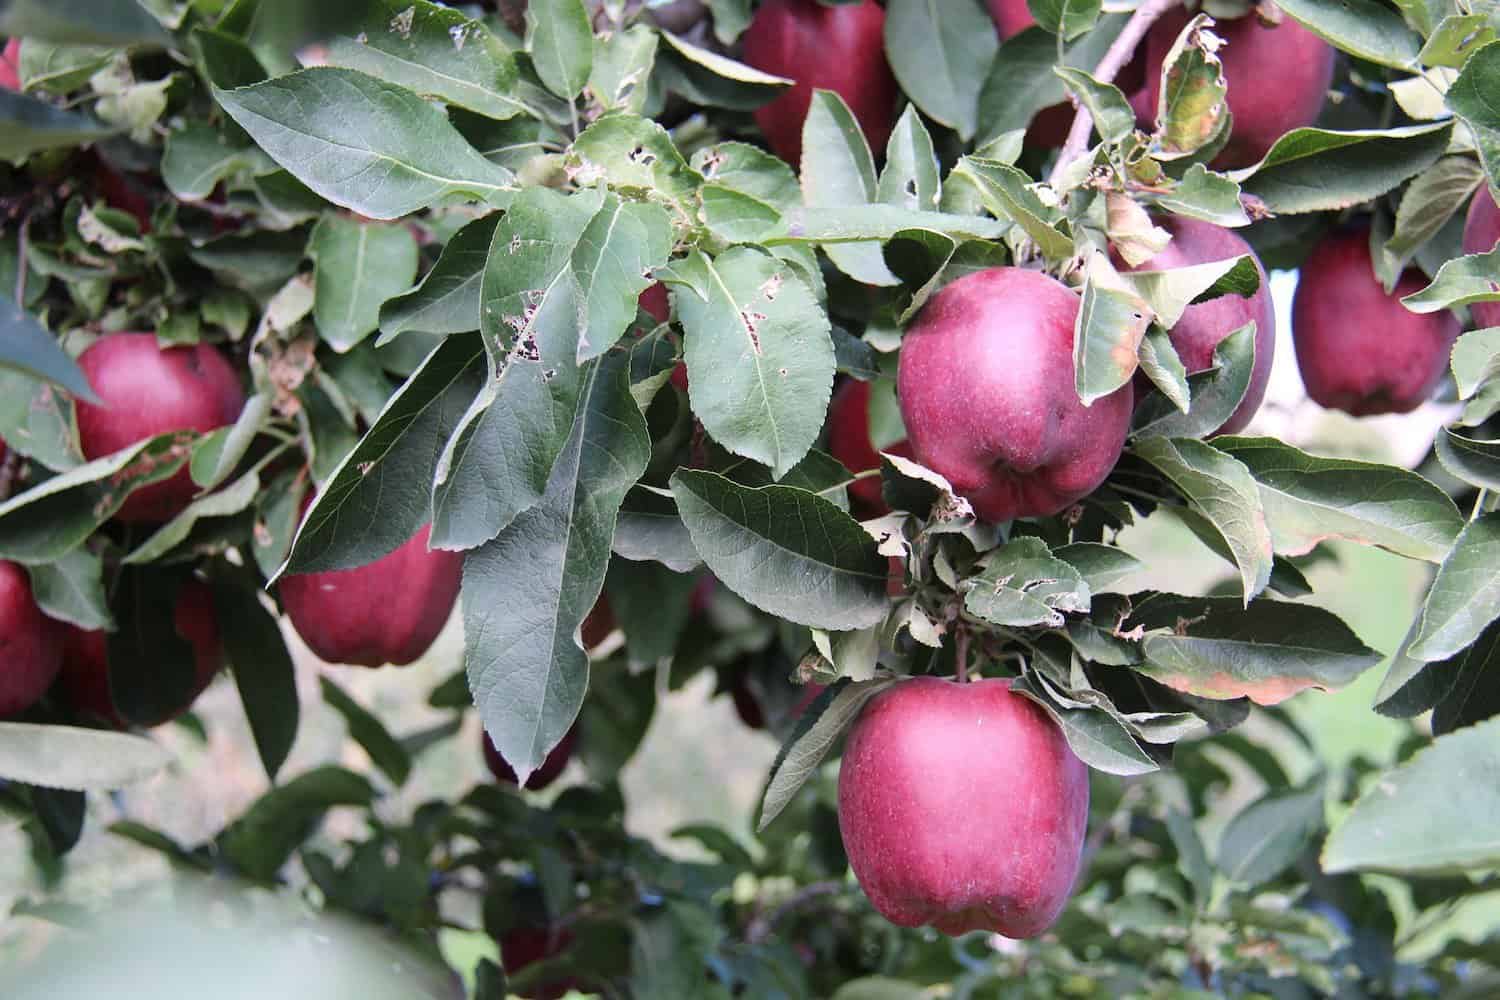 Red delicious apples on tree